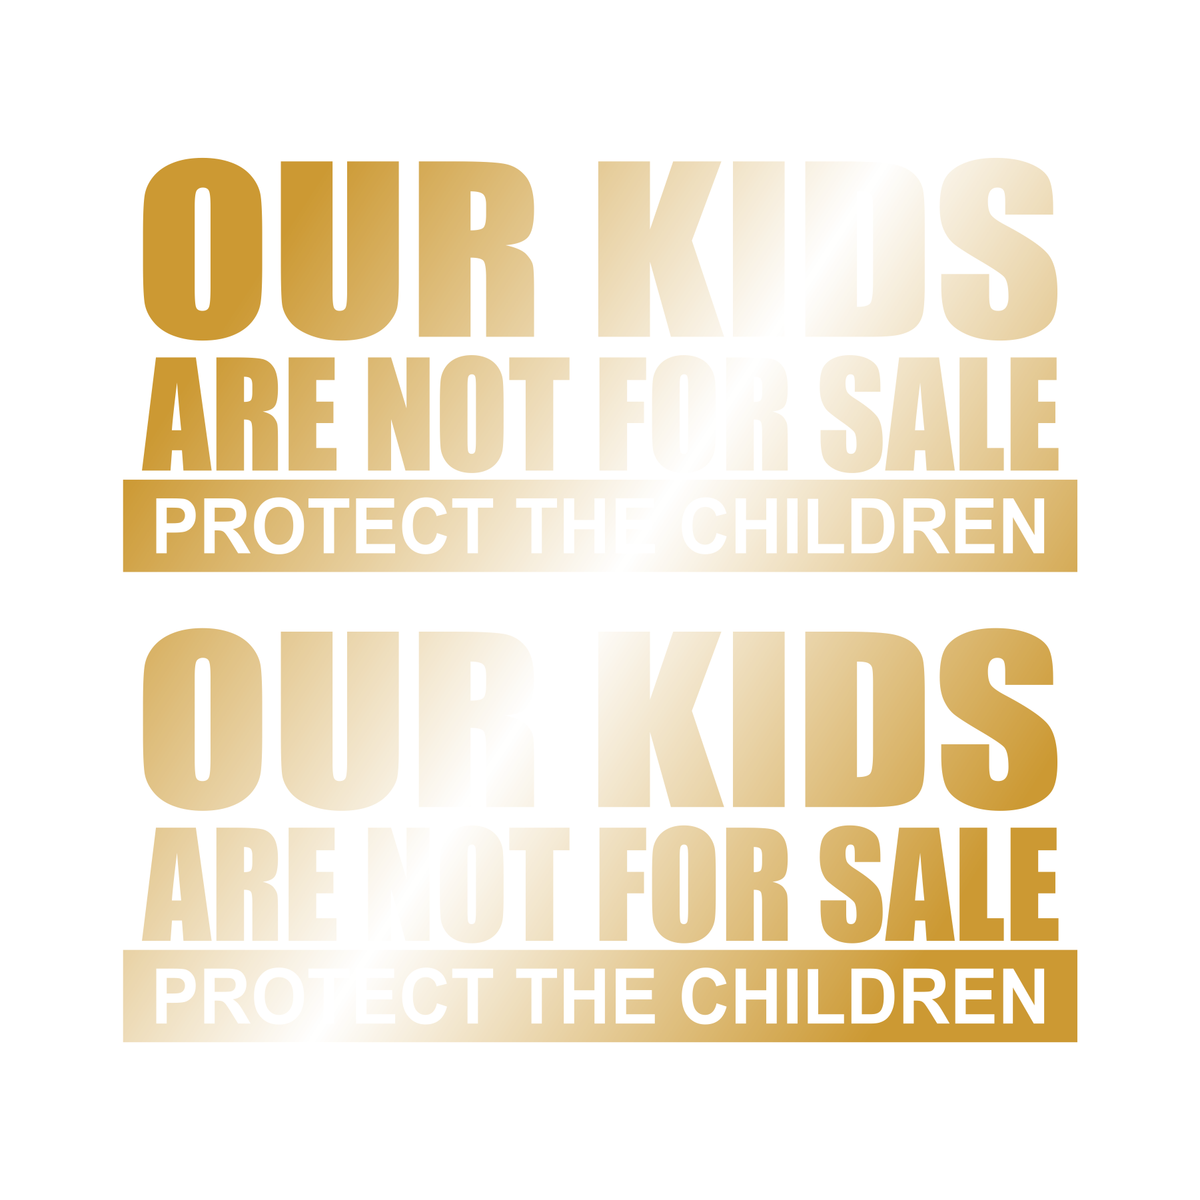 Pair of 2 - Our Kids Are Not For Sale - Protect the Children - Vinyl Decals - Free Shipping